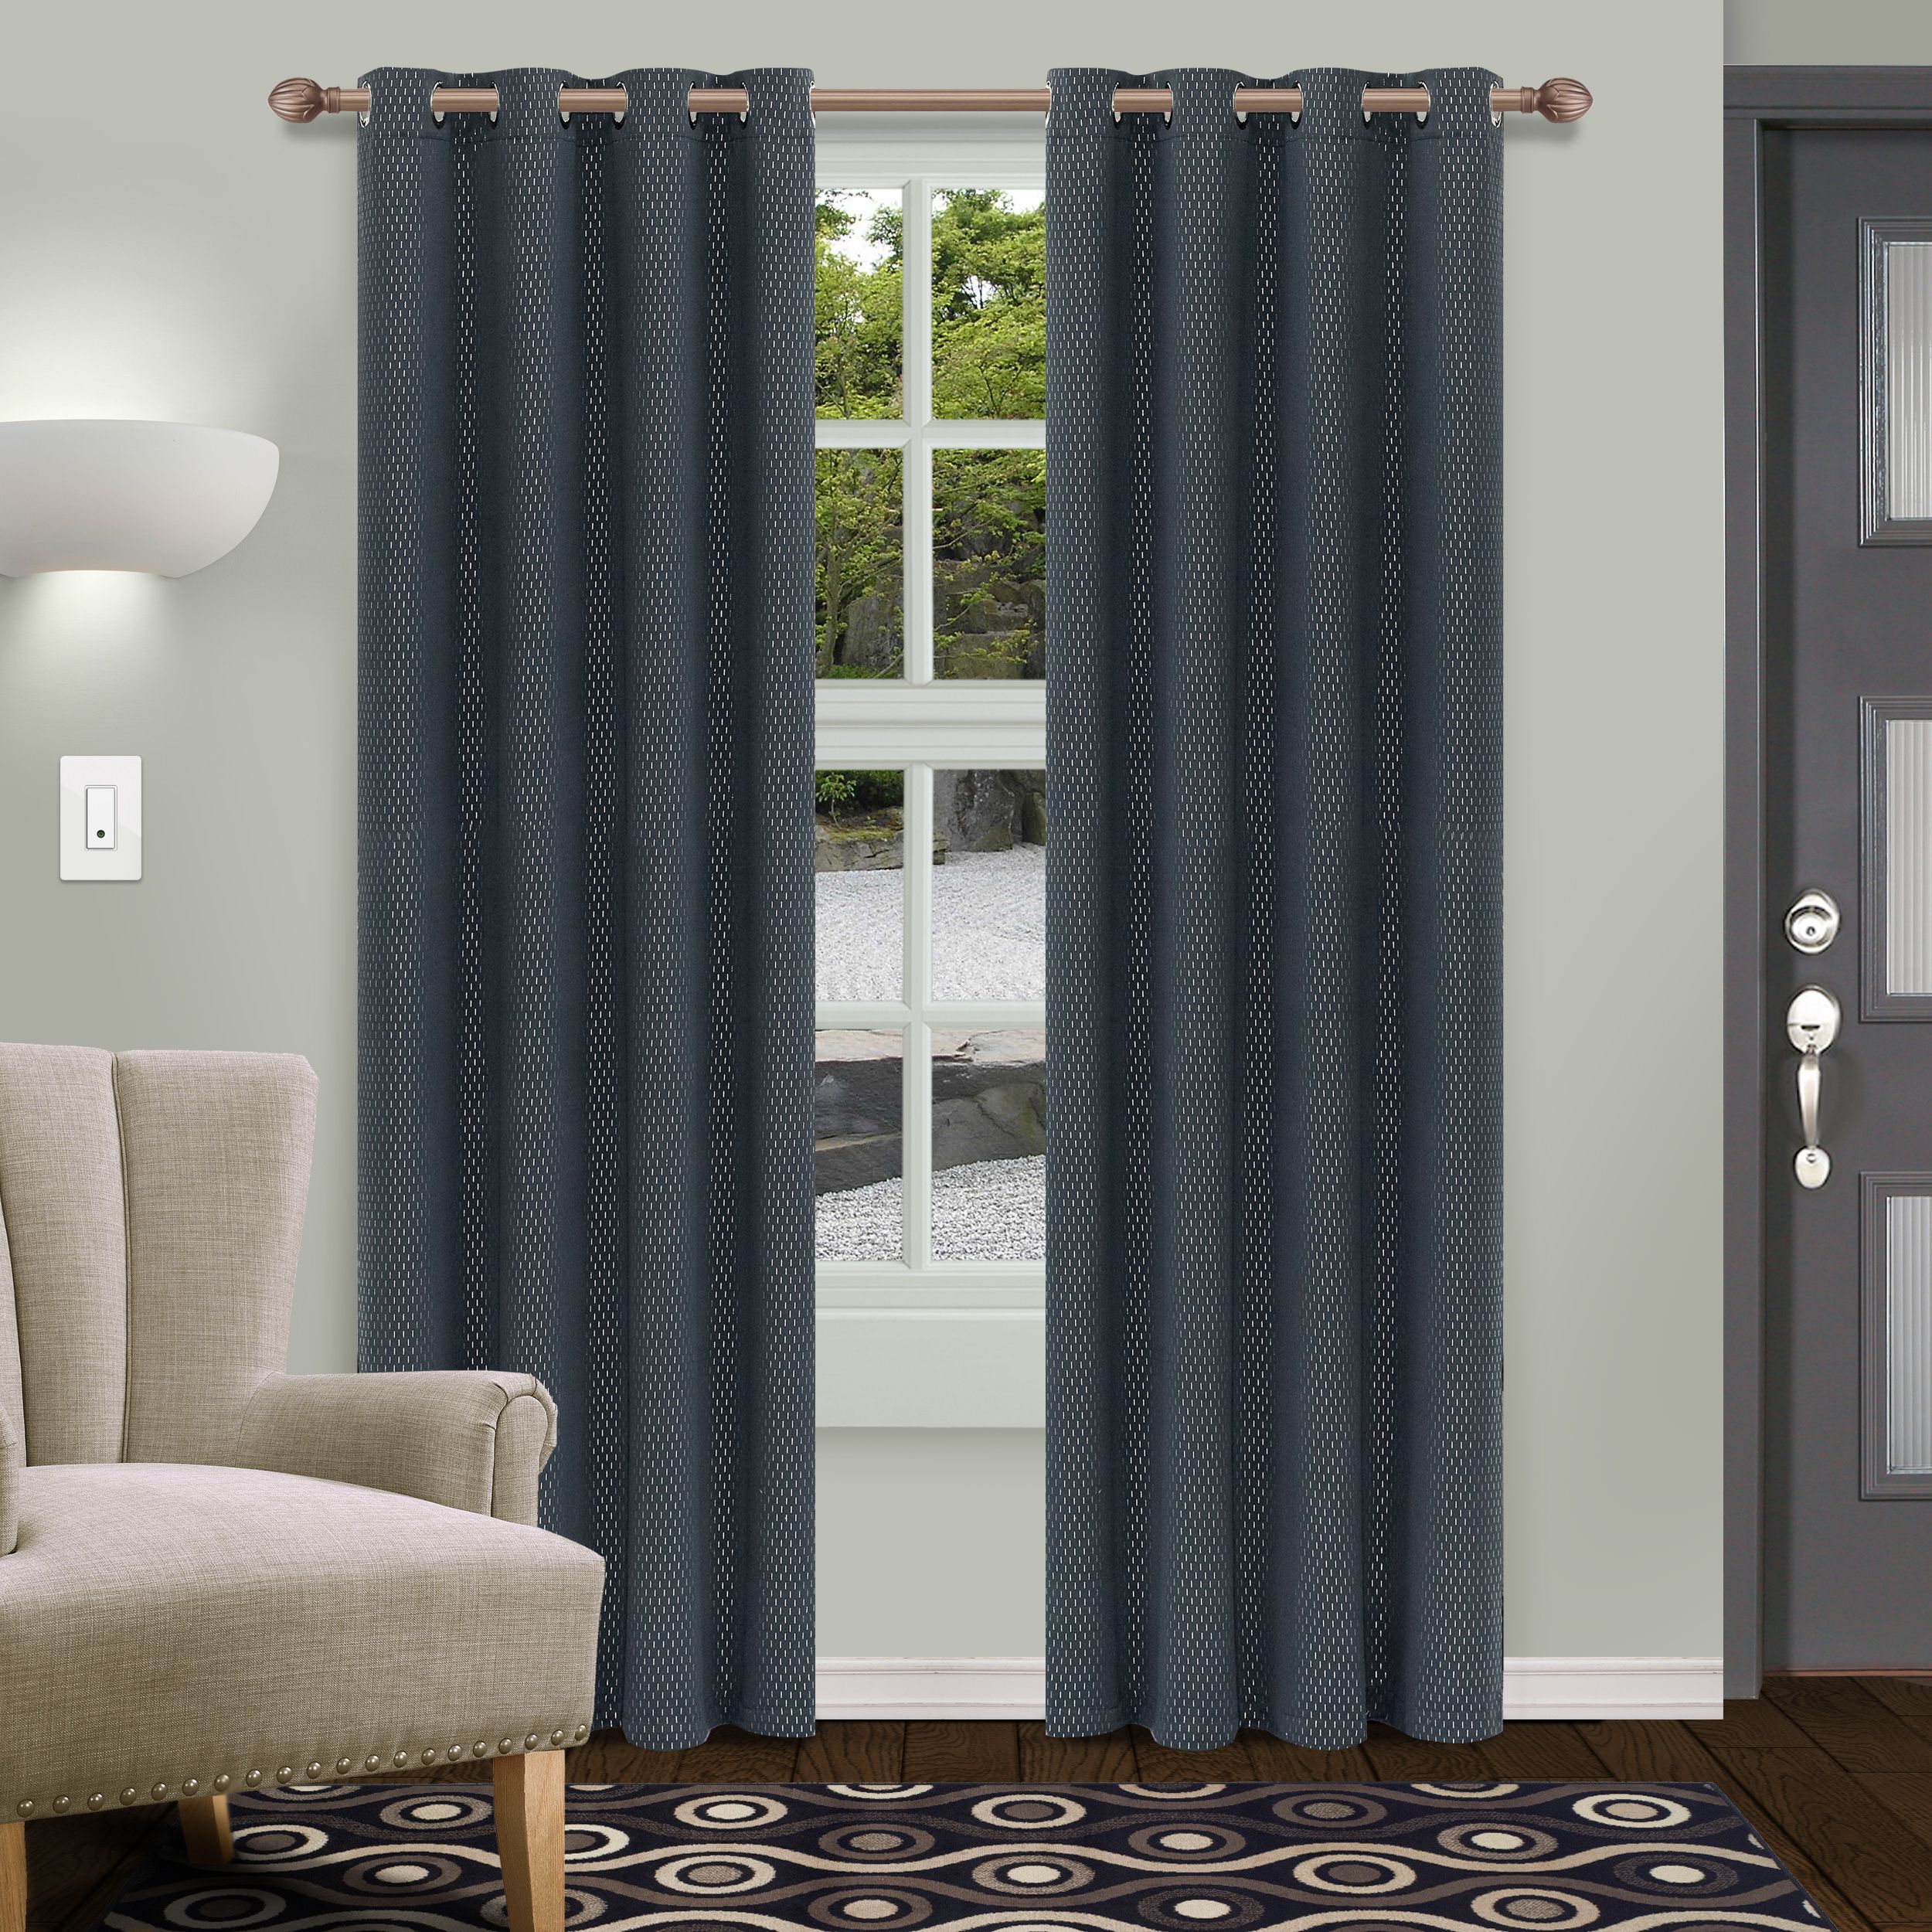 Superior Shimmer Textured Blackout Curtain Set Of 2, Insulated Panel With  Grommet Top In Thermal Insulated Blackout Curtain Panel Pairs (View 27 of 30)